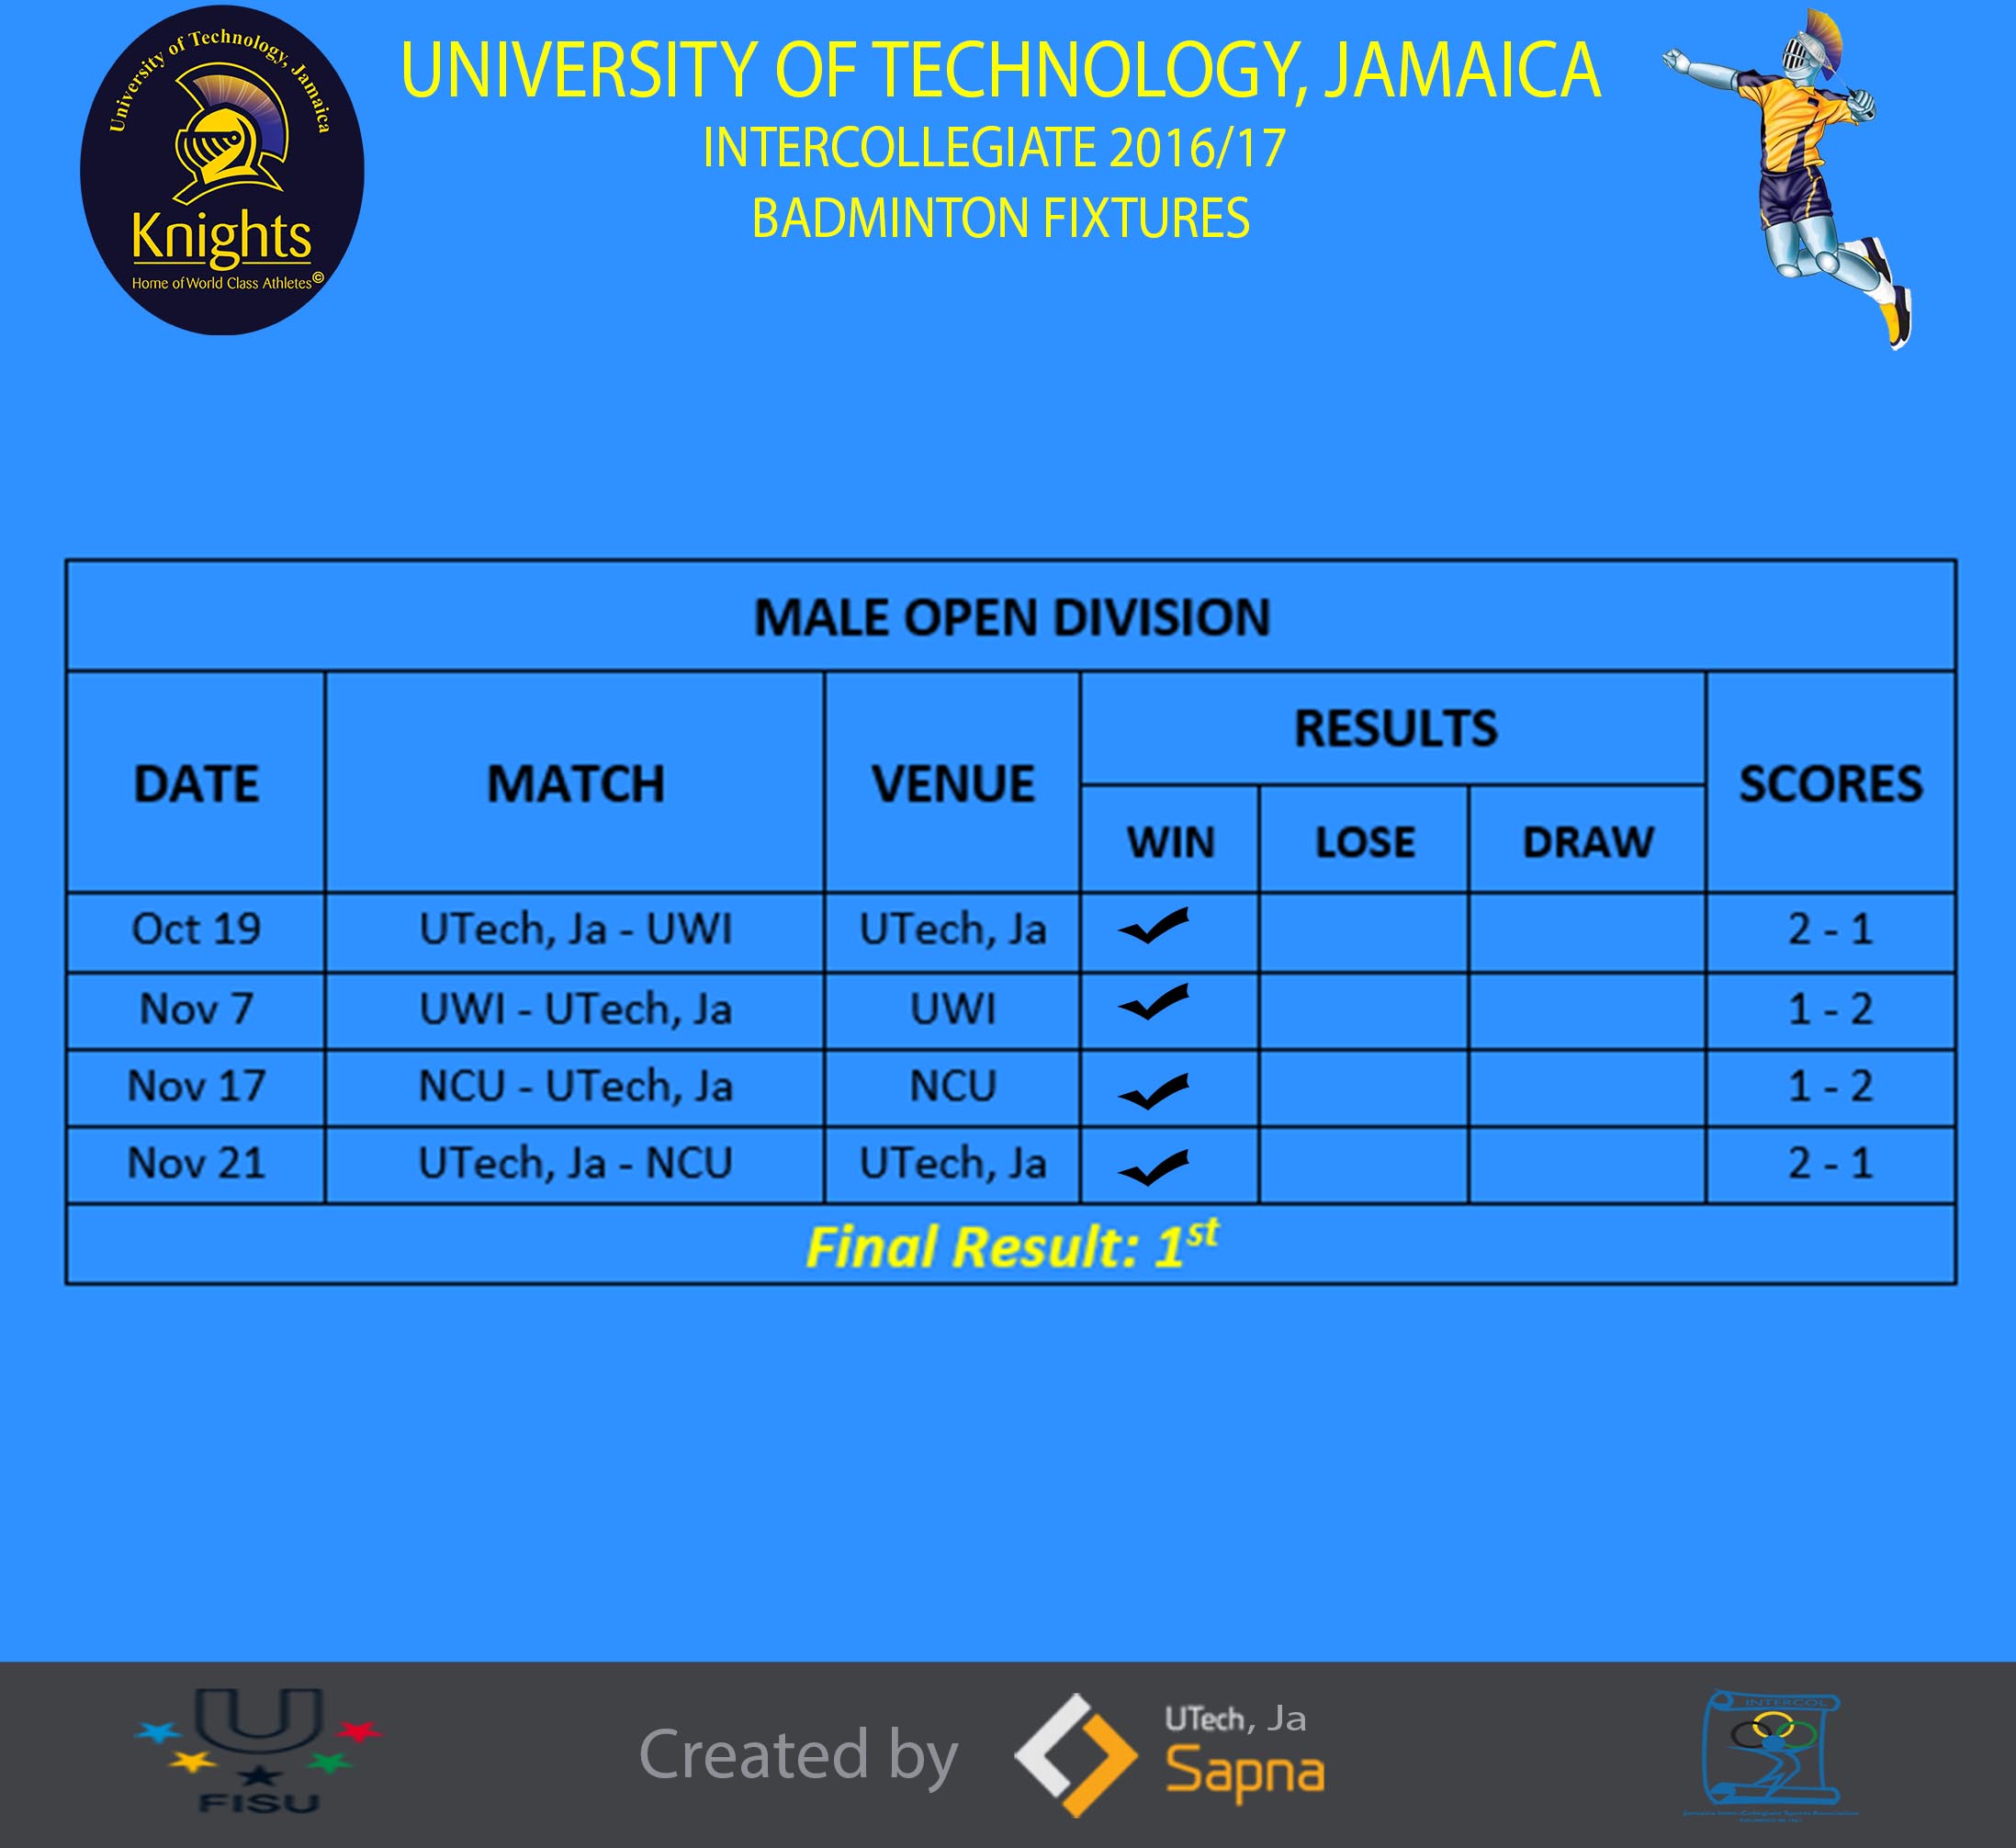 Schedule & Results(Male Open Division)